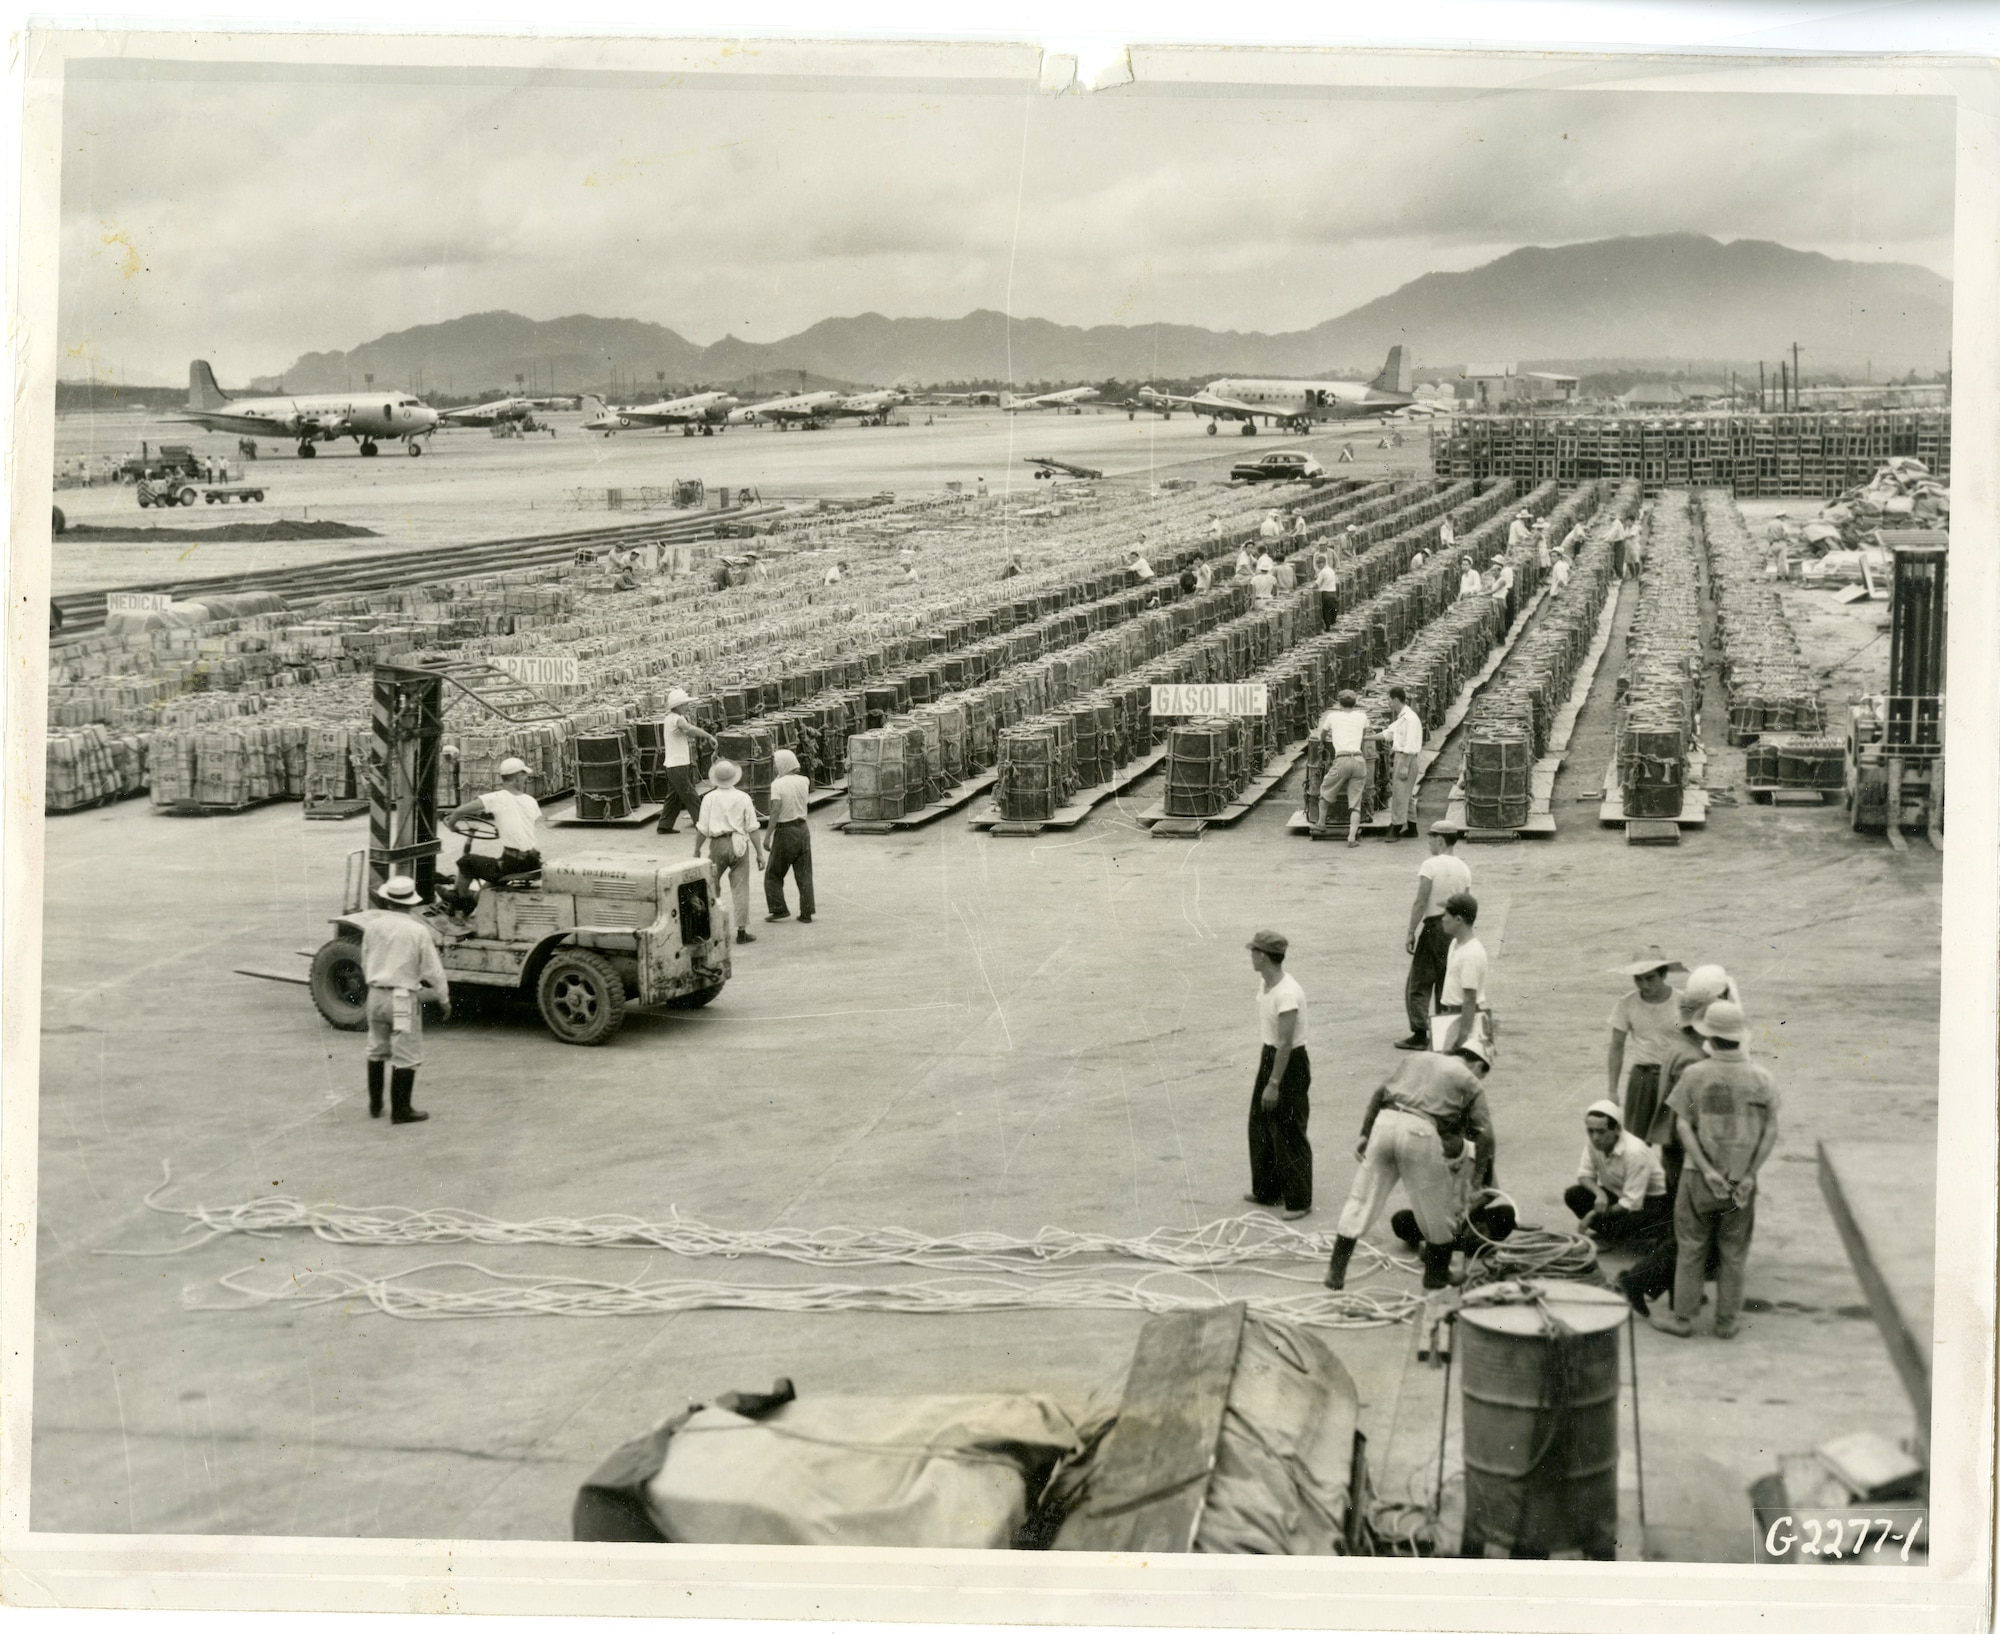 Long rows of gasoline, C-rations, napalm tanks, and medical supplies